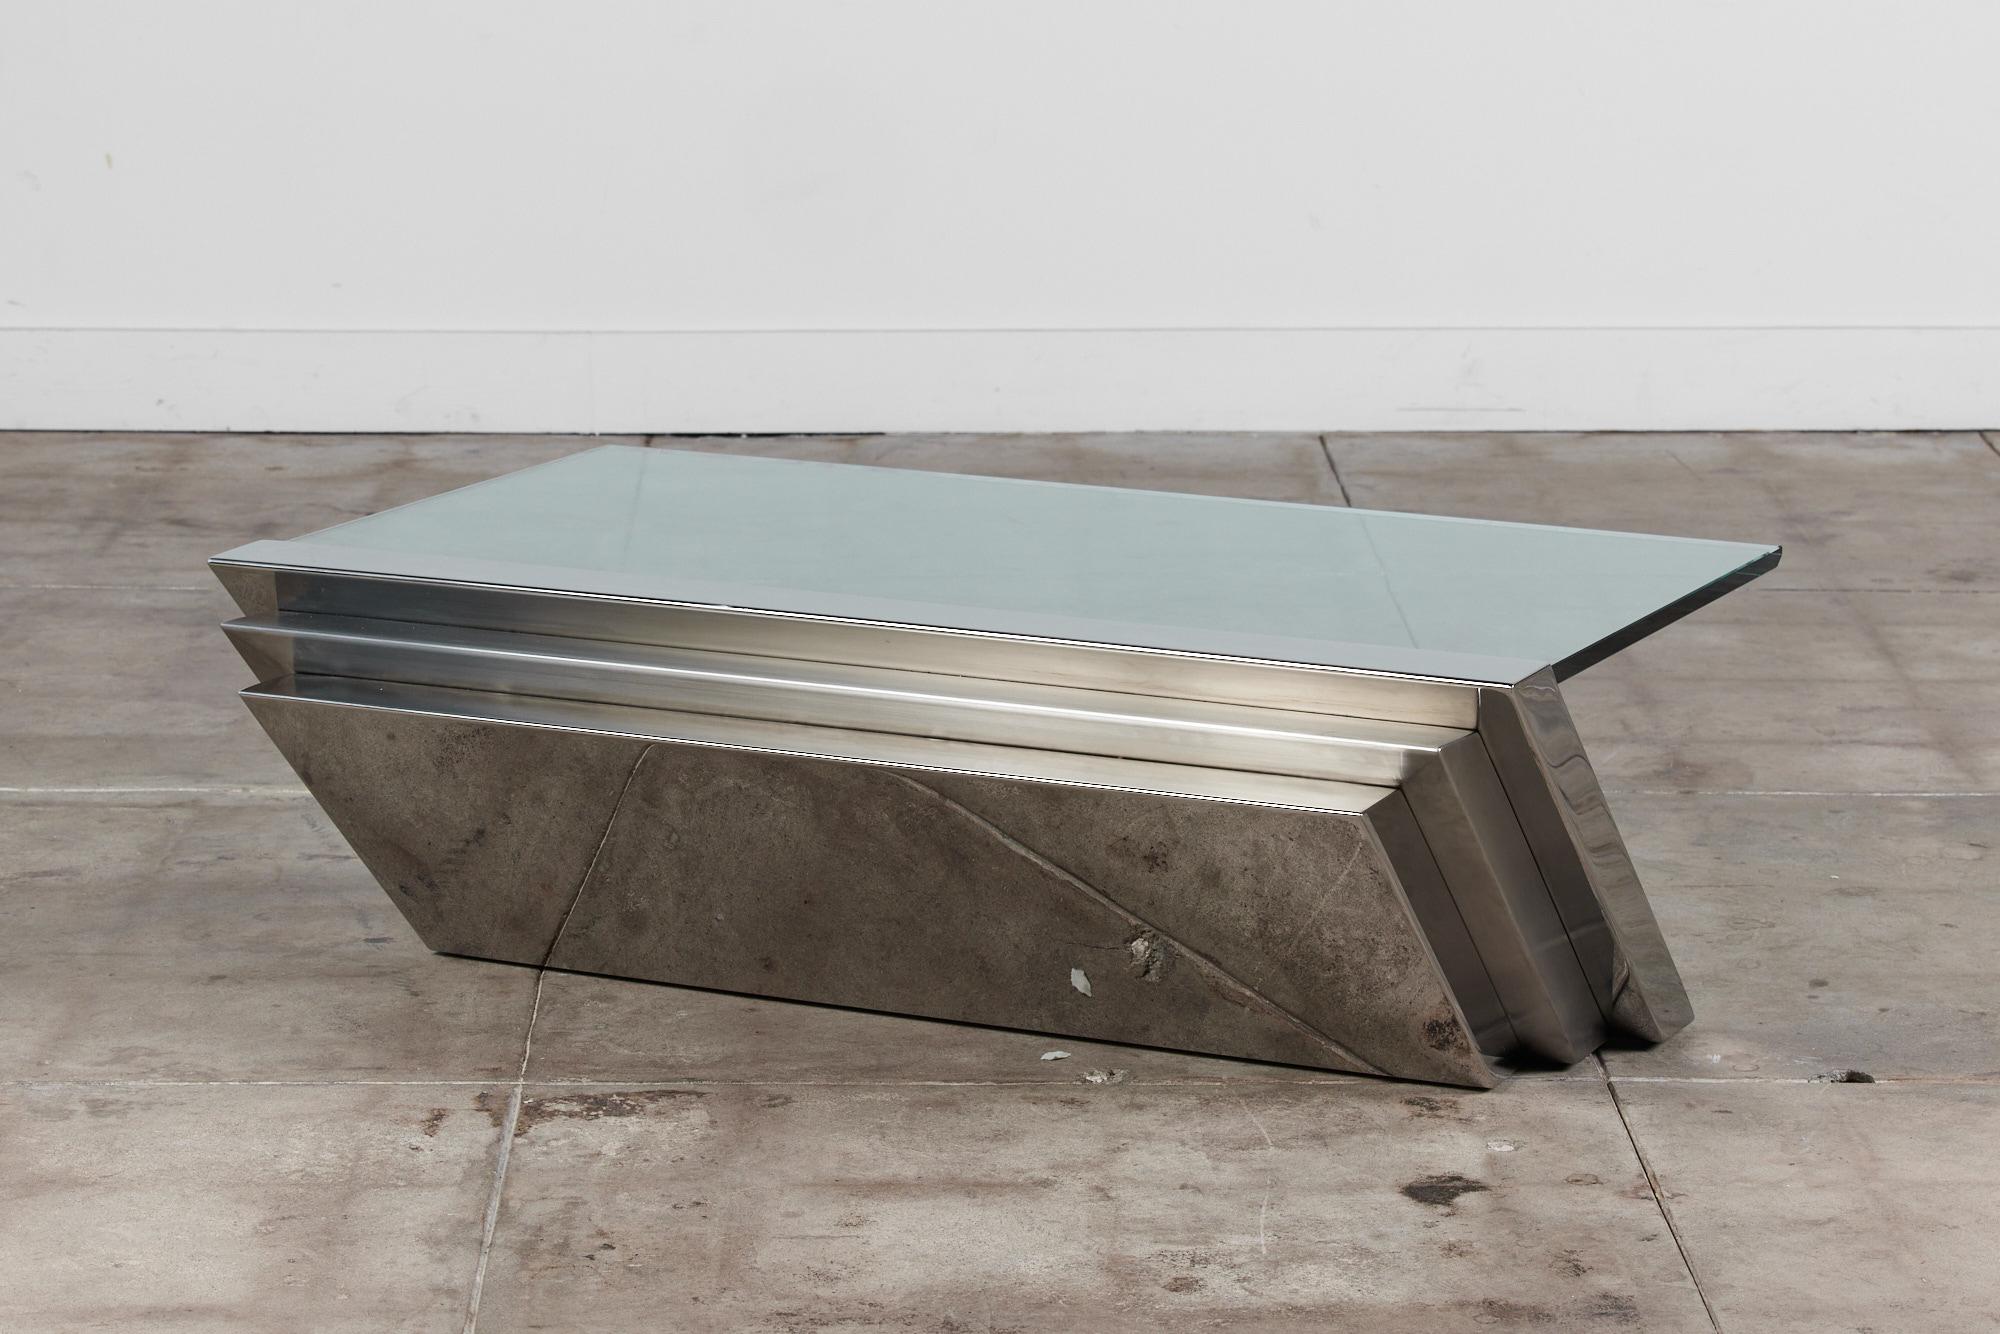 American J. Wade Beam for Breuton Cantilevered Coffee Table